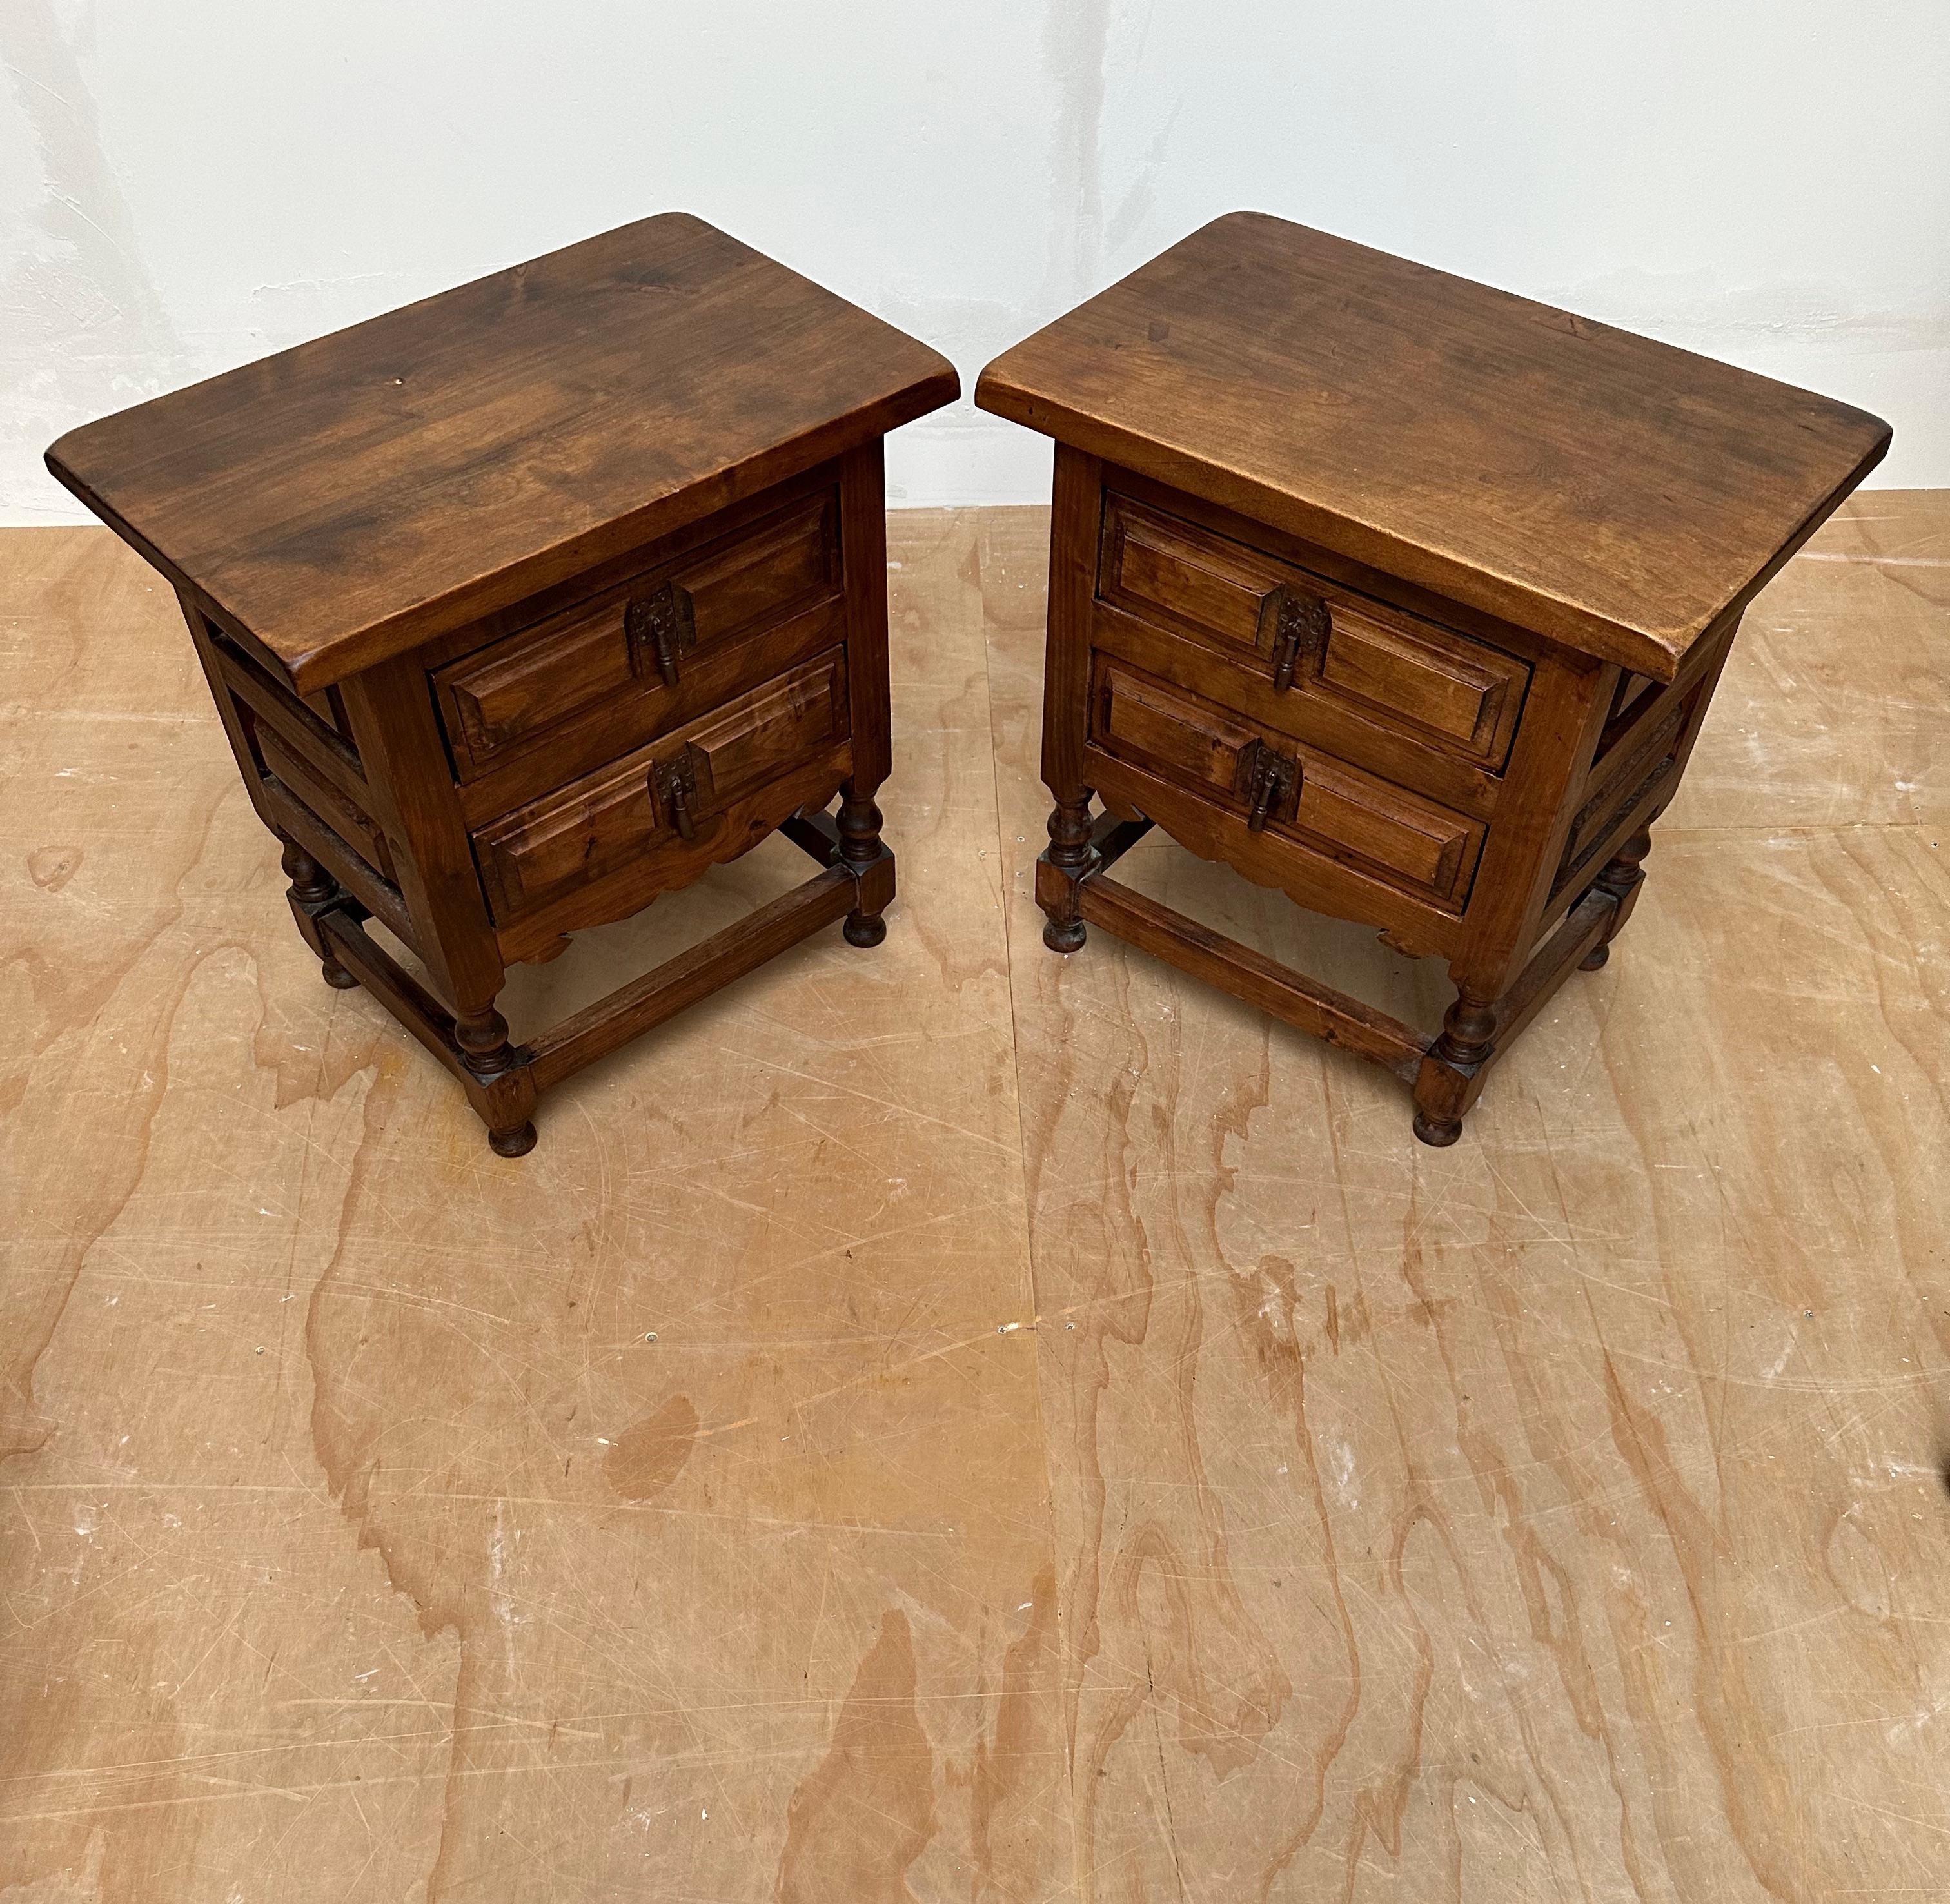 Forged Pair of Midcentury Spanish Hacienda Style Two-Drawers Bedside Tables Nightstands For Sale